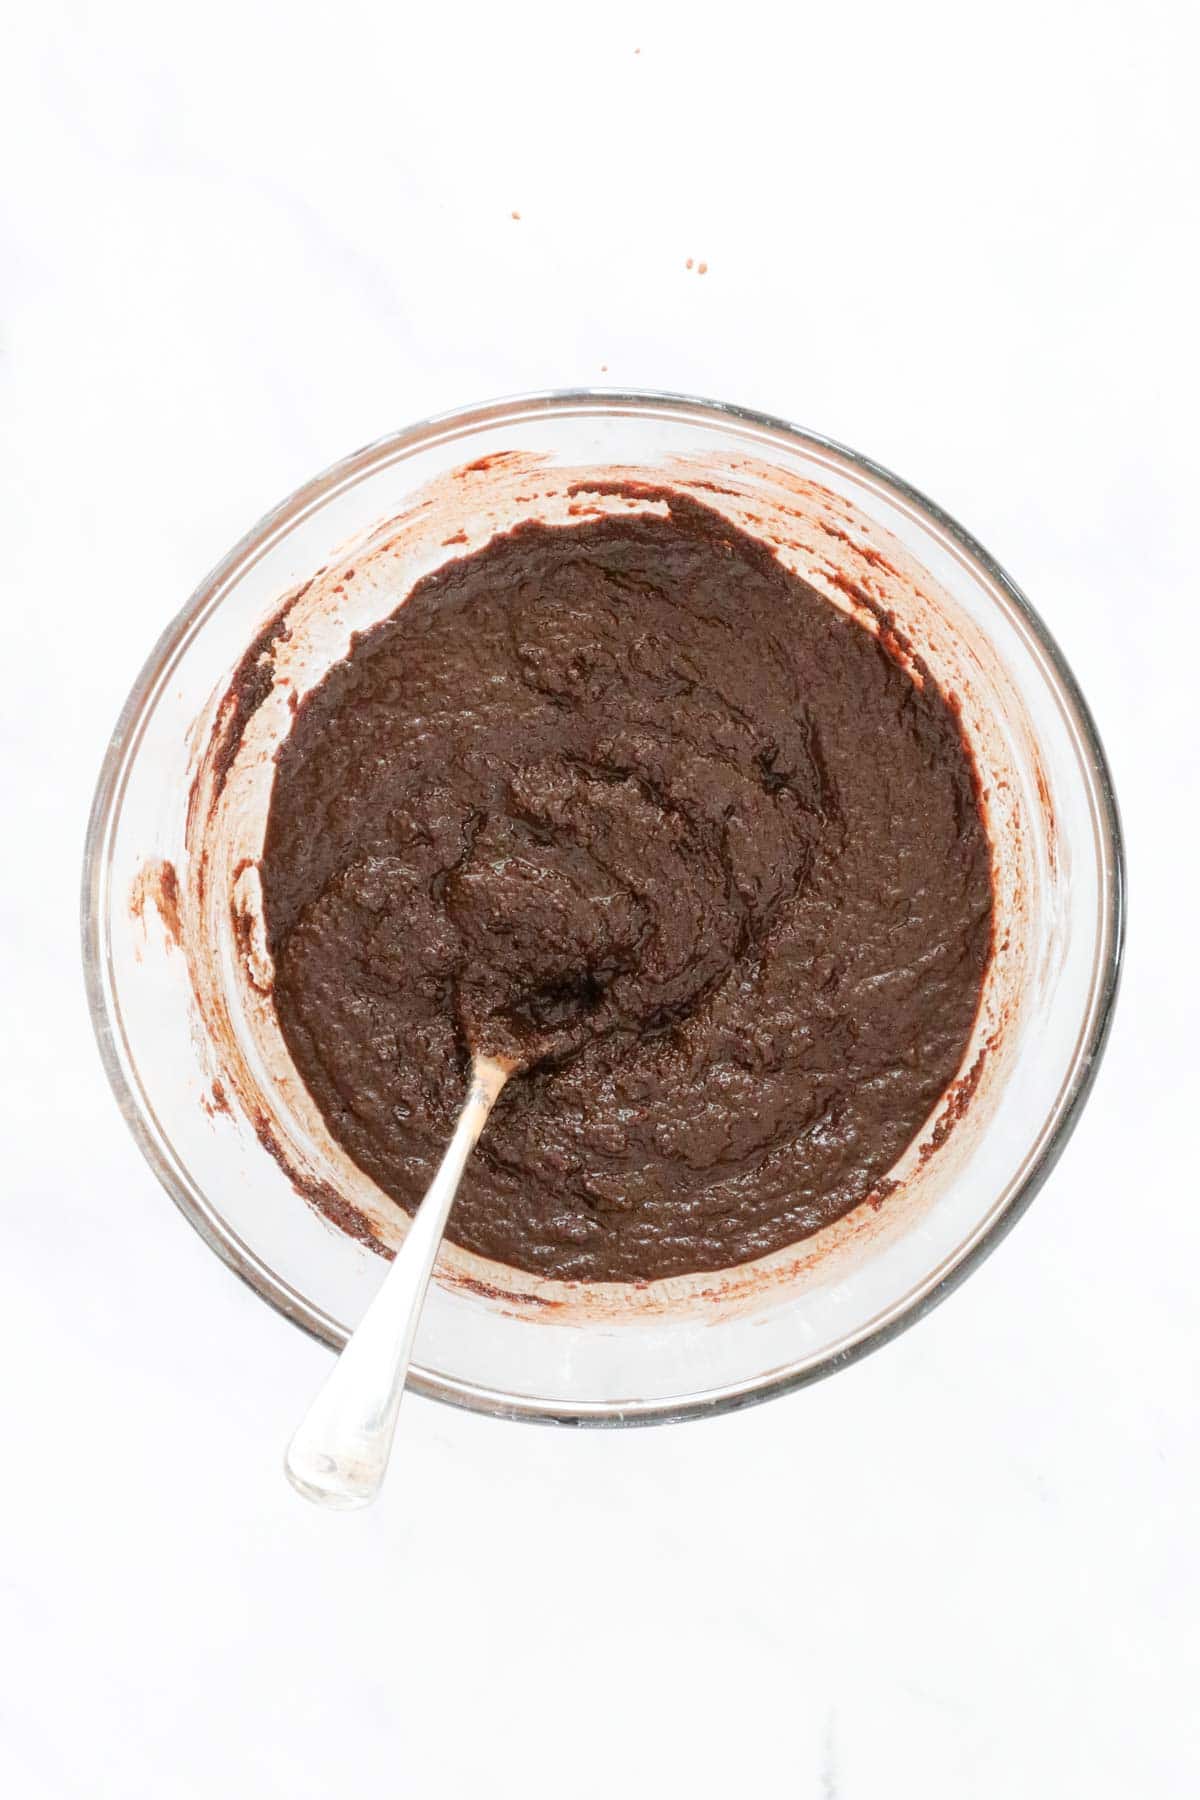 Cocoa and sugar mixed together with melted butter mixture in a glass bowl.